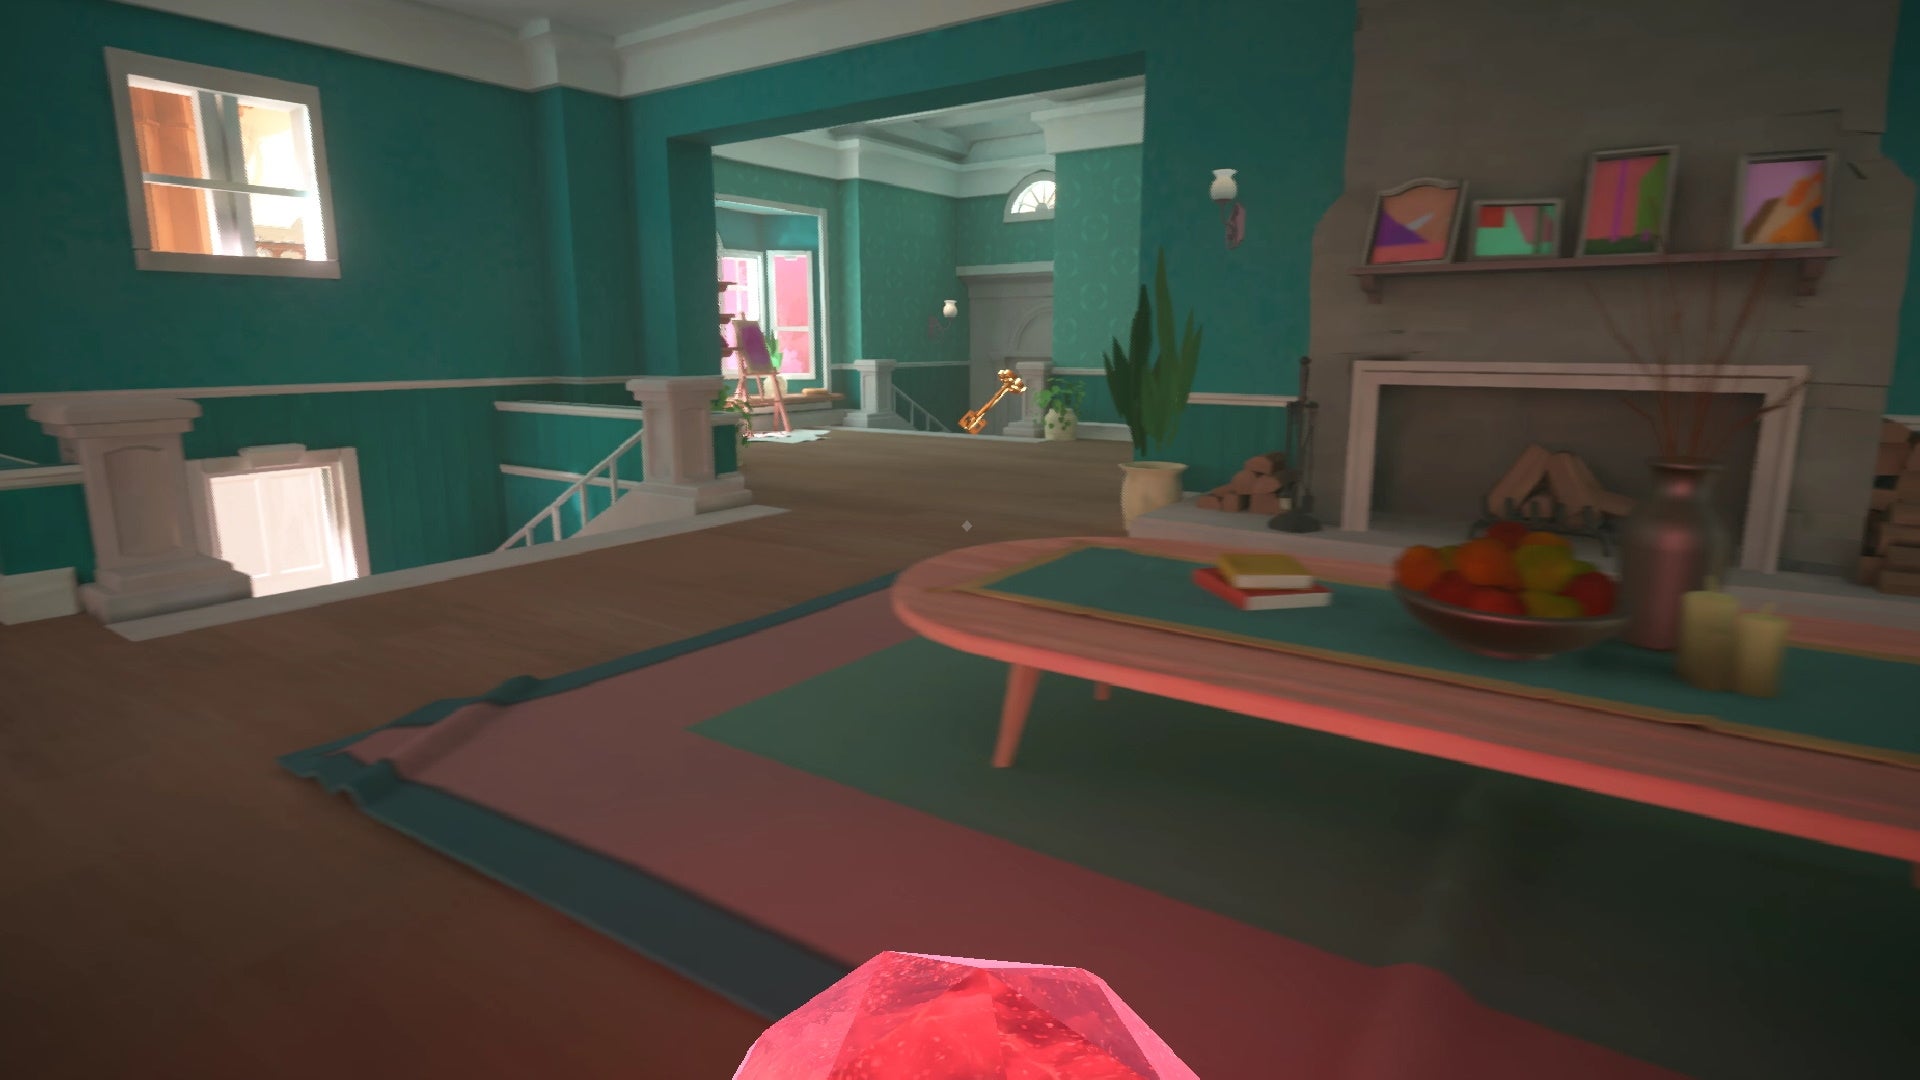 A screenshot of Maquette which shows me exploring a very green house. I have a red orb in my hand and there's a big key directly opposite me.